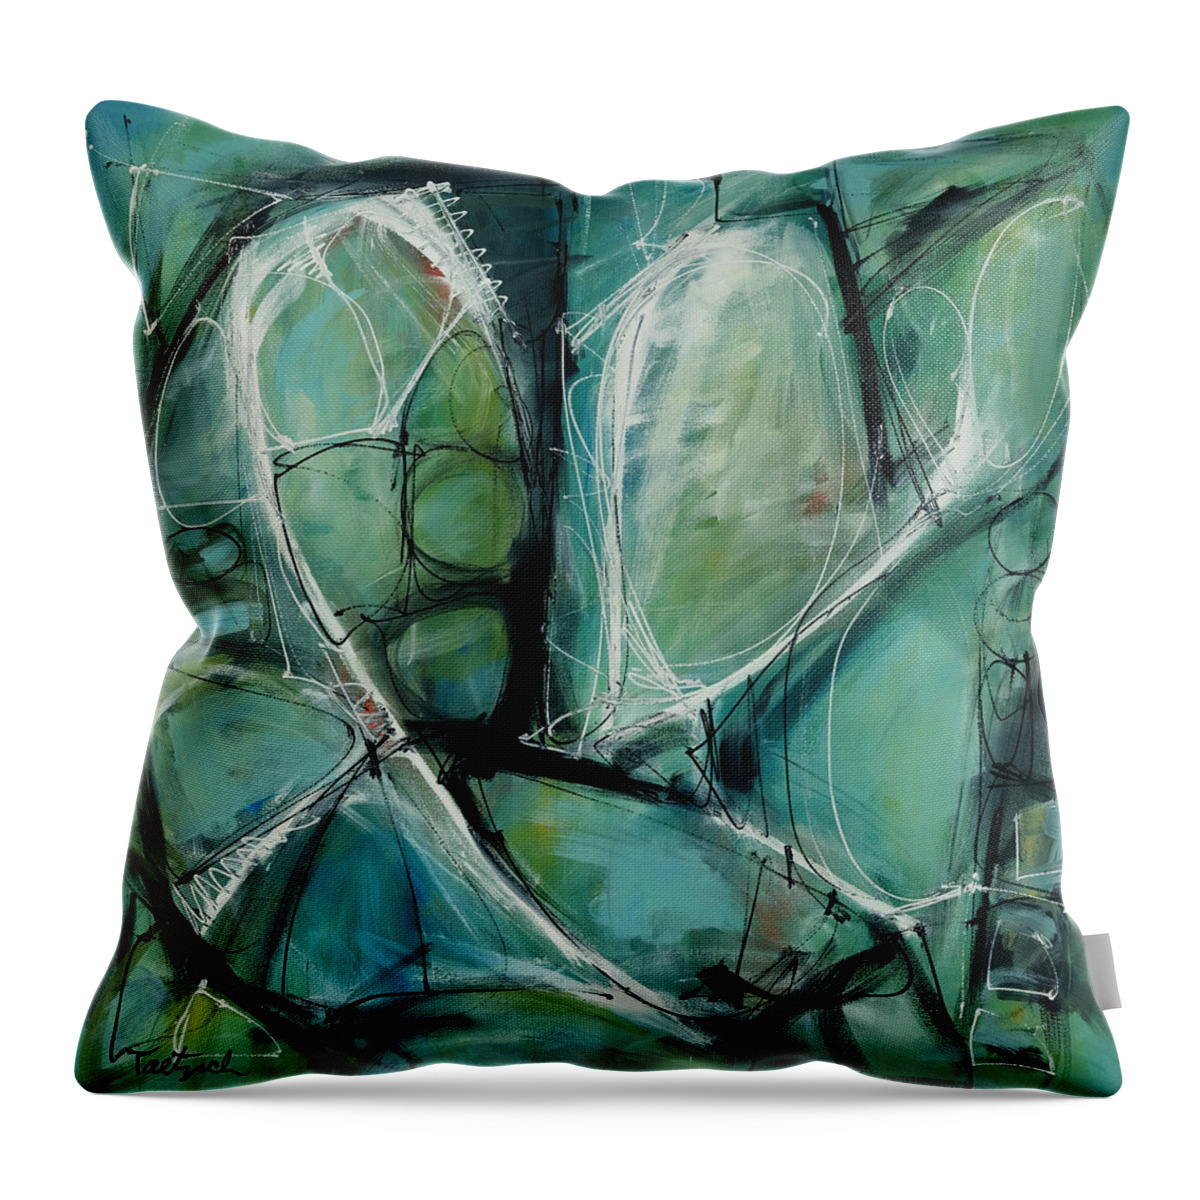 Abstract Throw Pillow featuring the painting Tortoise View by Lynne Taetzsch